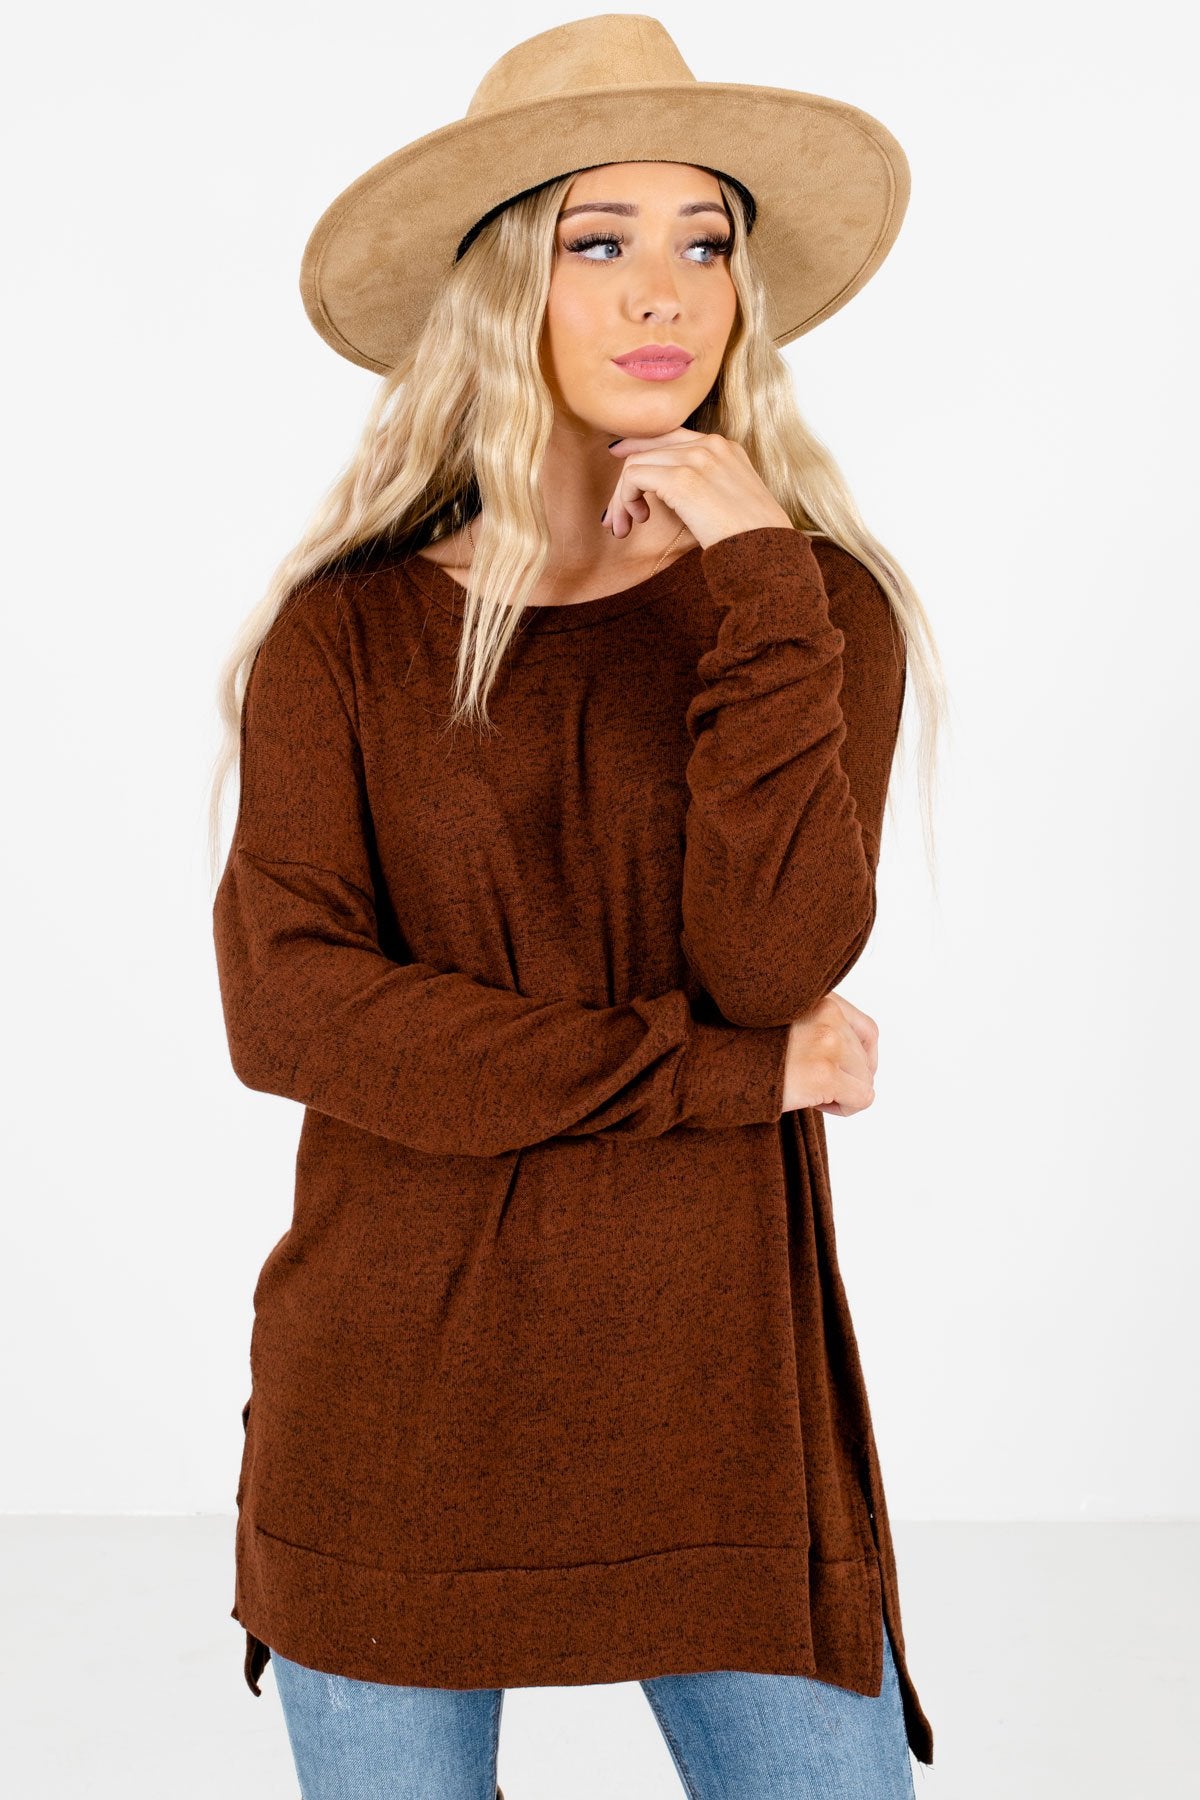 Women’s Brown Warm and Cozy Boutique Clothing